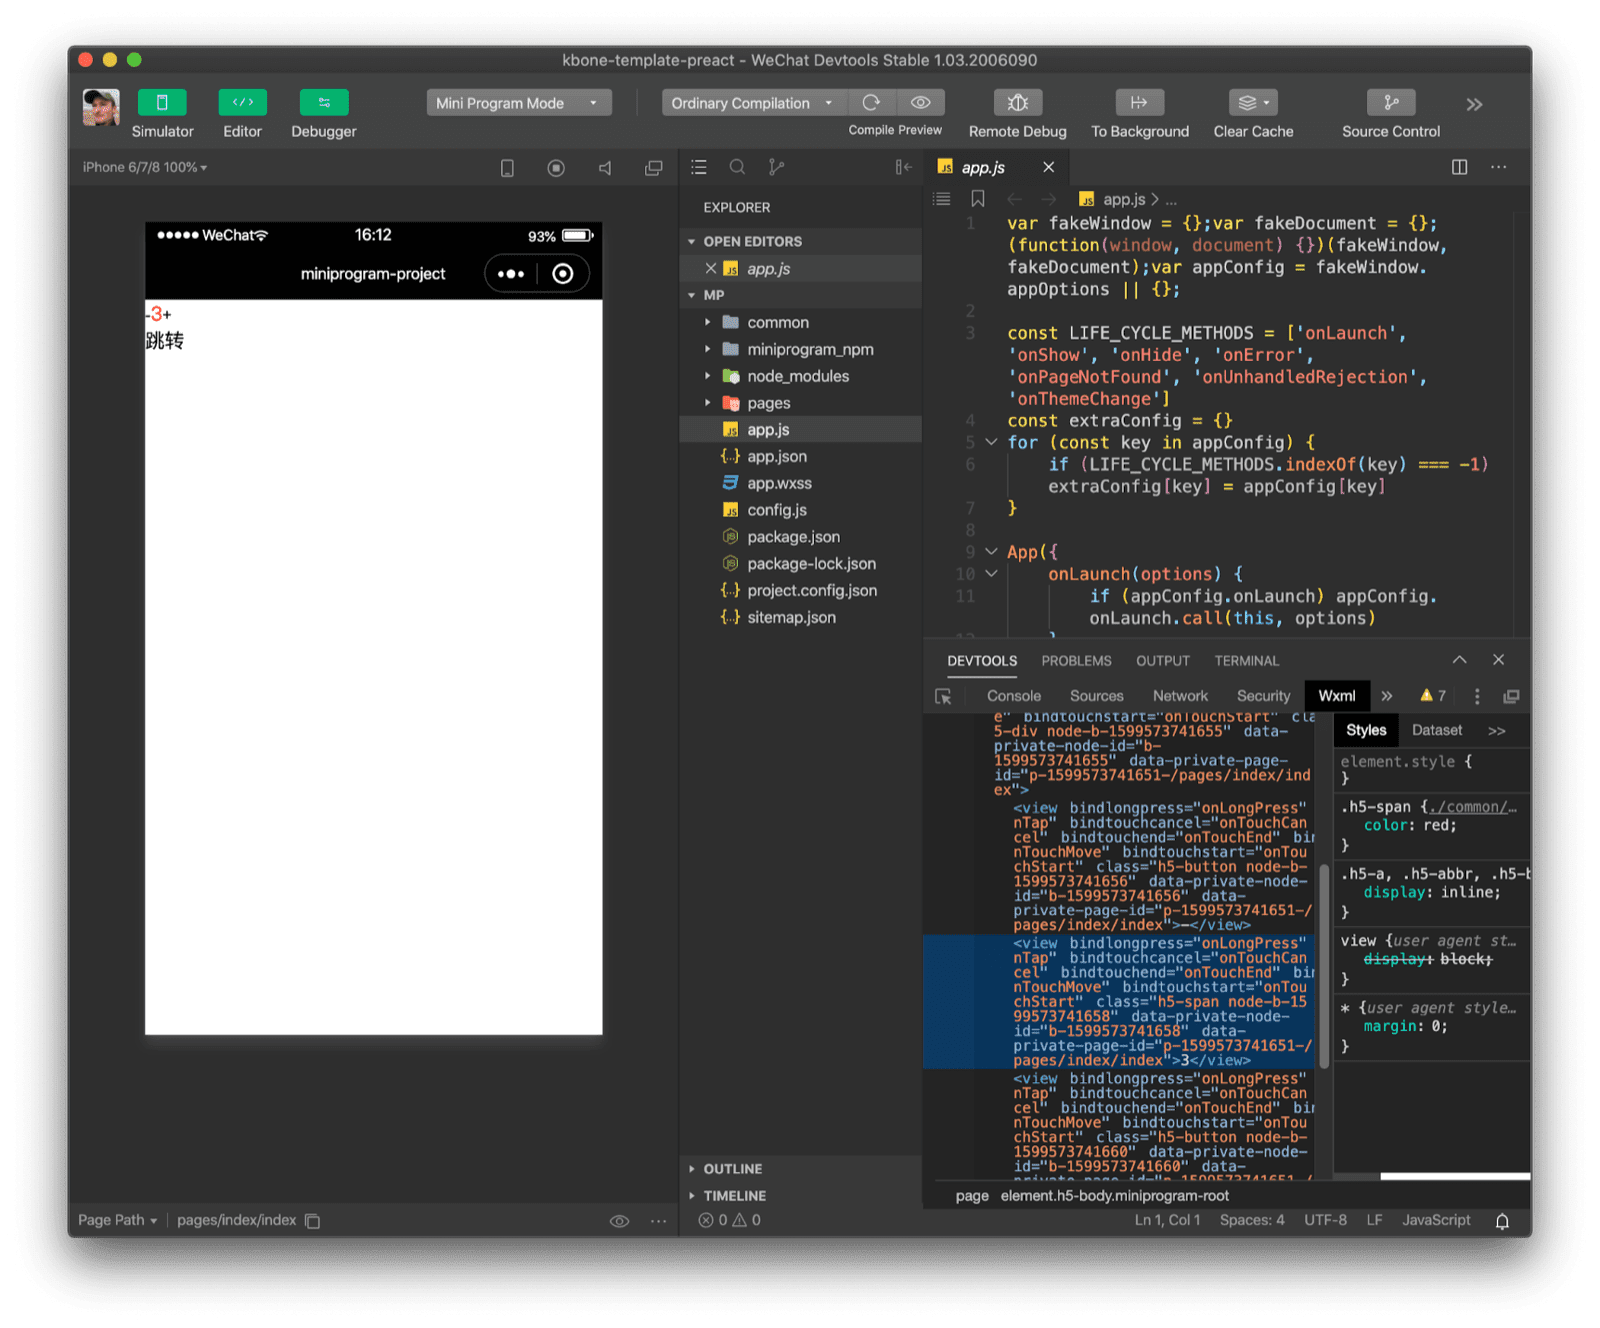 The Preact kbone template demo app opened in WeChat DevTools. Inspecting the DOM structure shows a significant overhead compared to the web app.